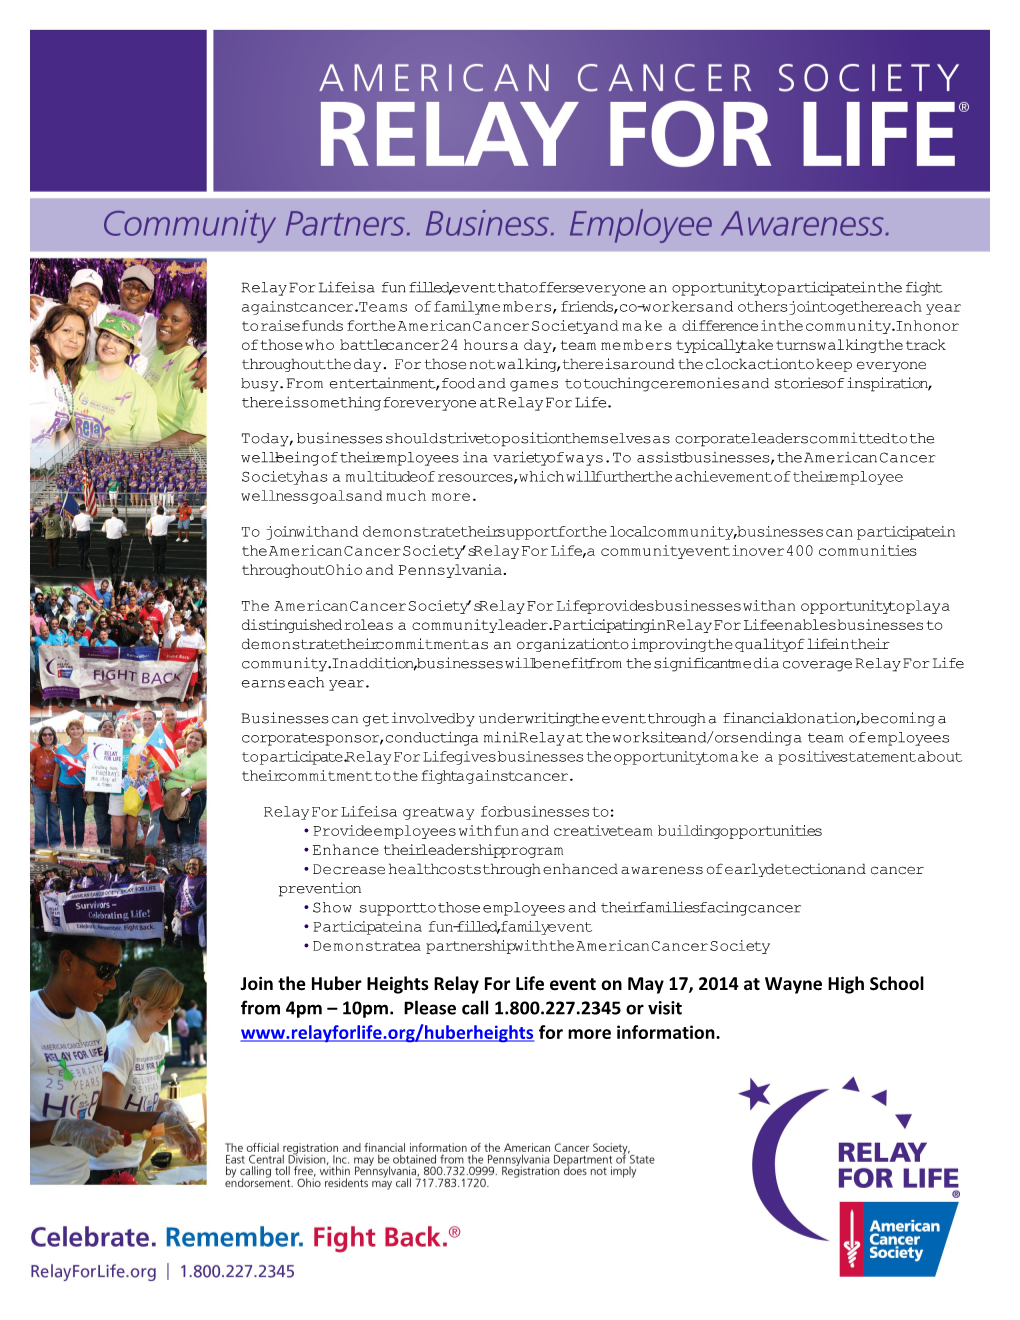 Relay for Life Is a Fun Filled, Overnight Event That Offers Everyone an Opportunity To